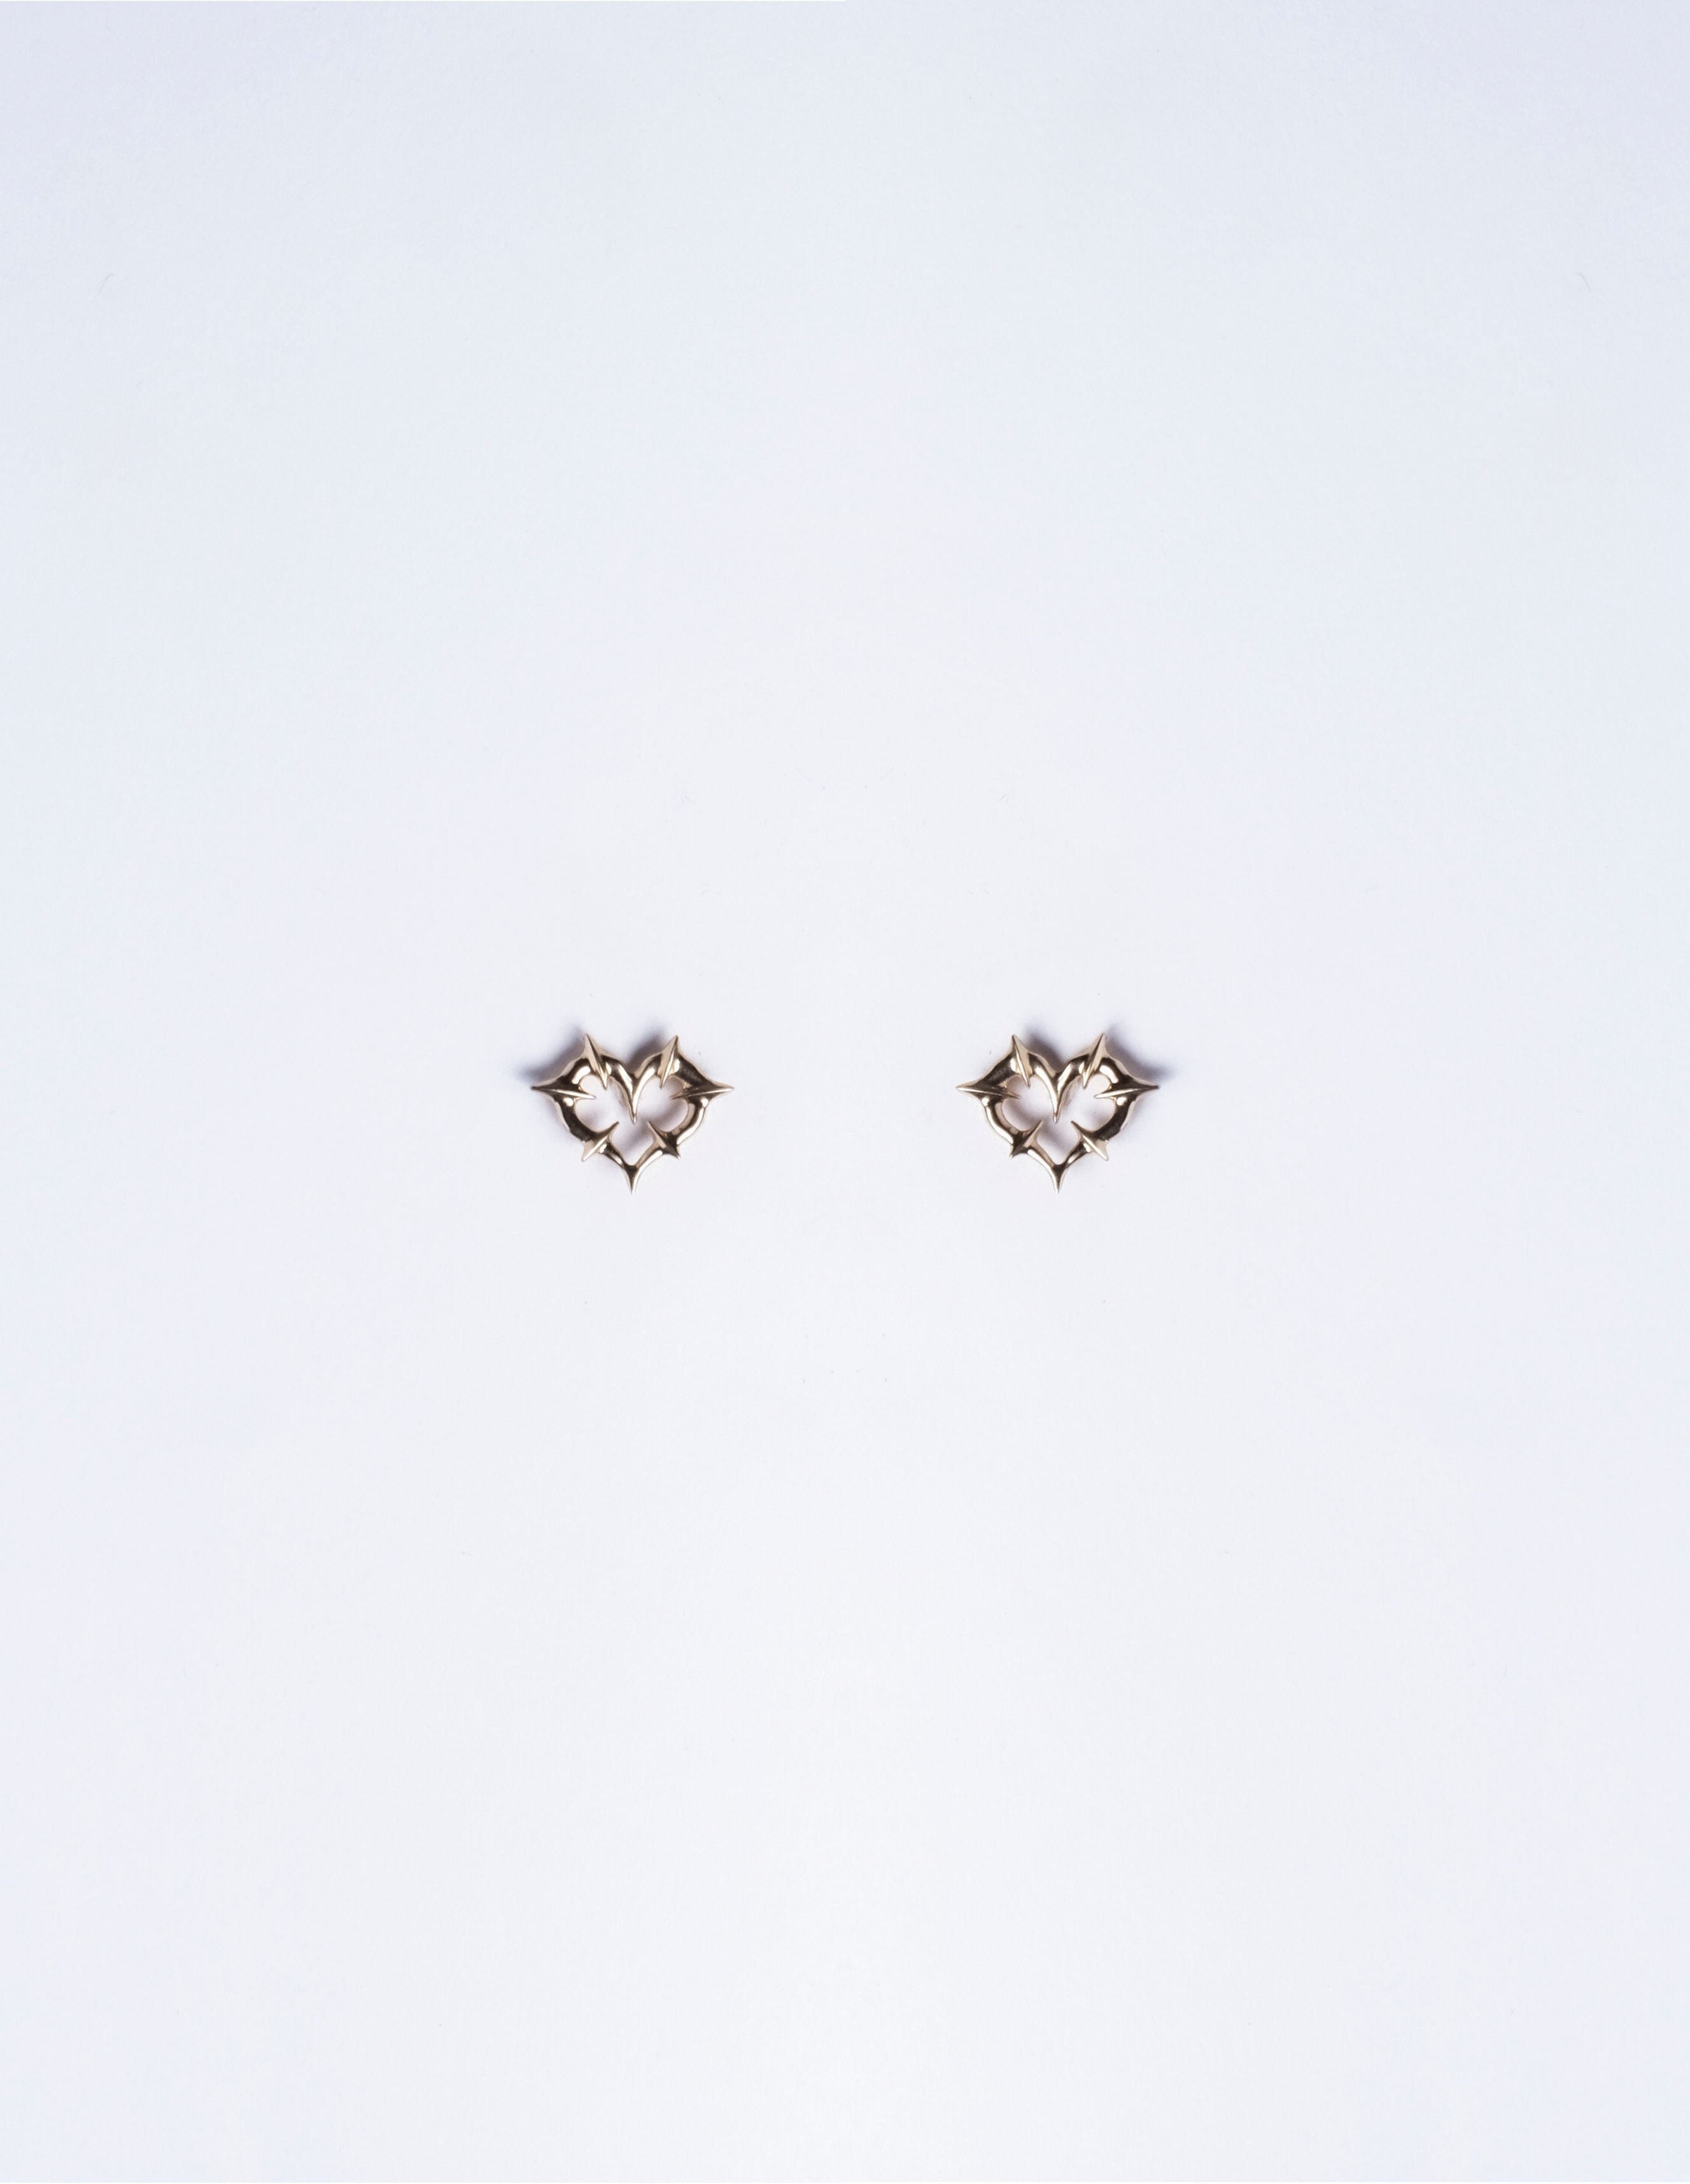 Pair of Tiny Tough Love Studs in 14K Gold